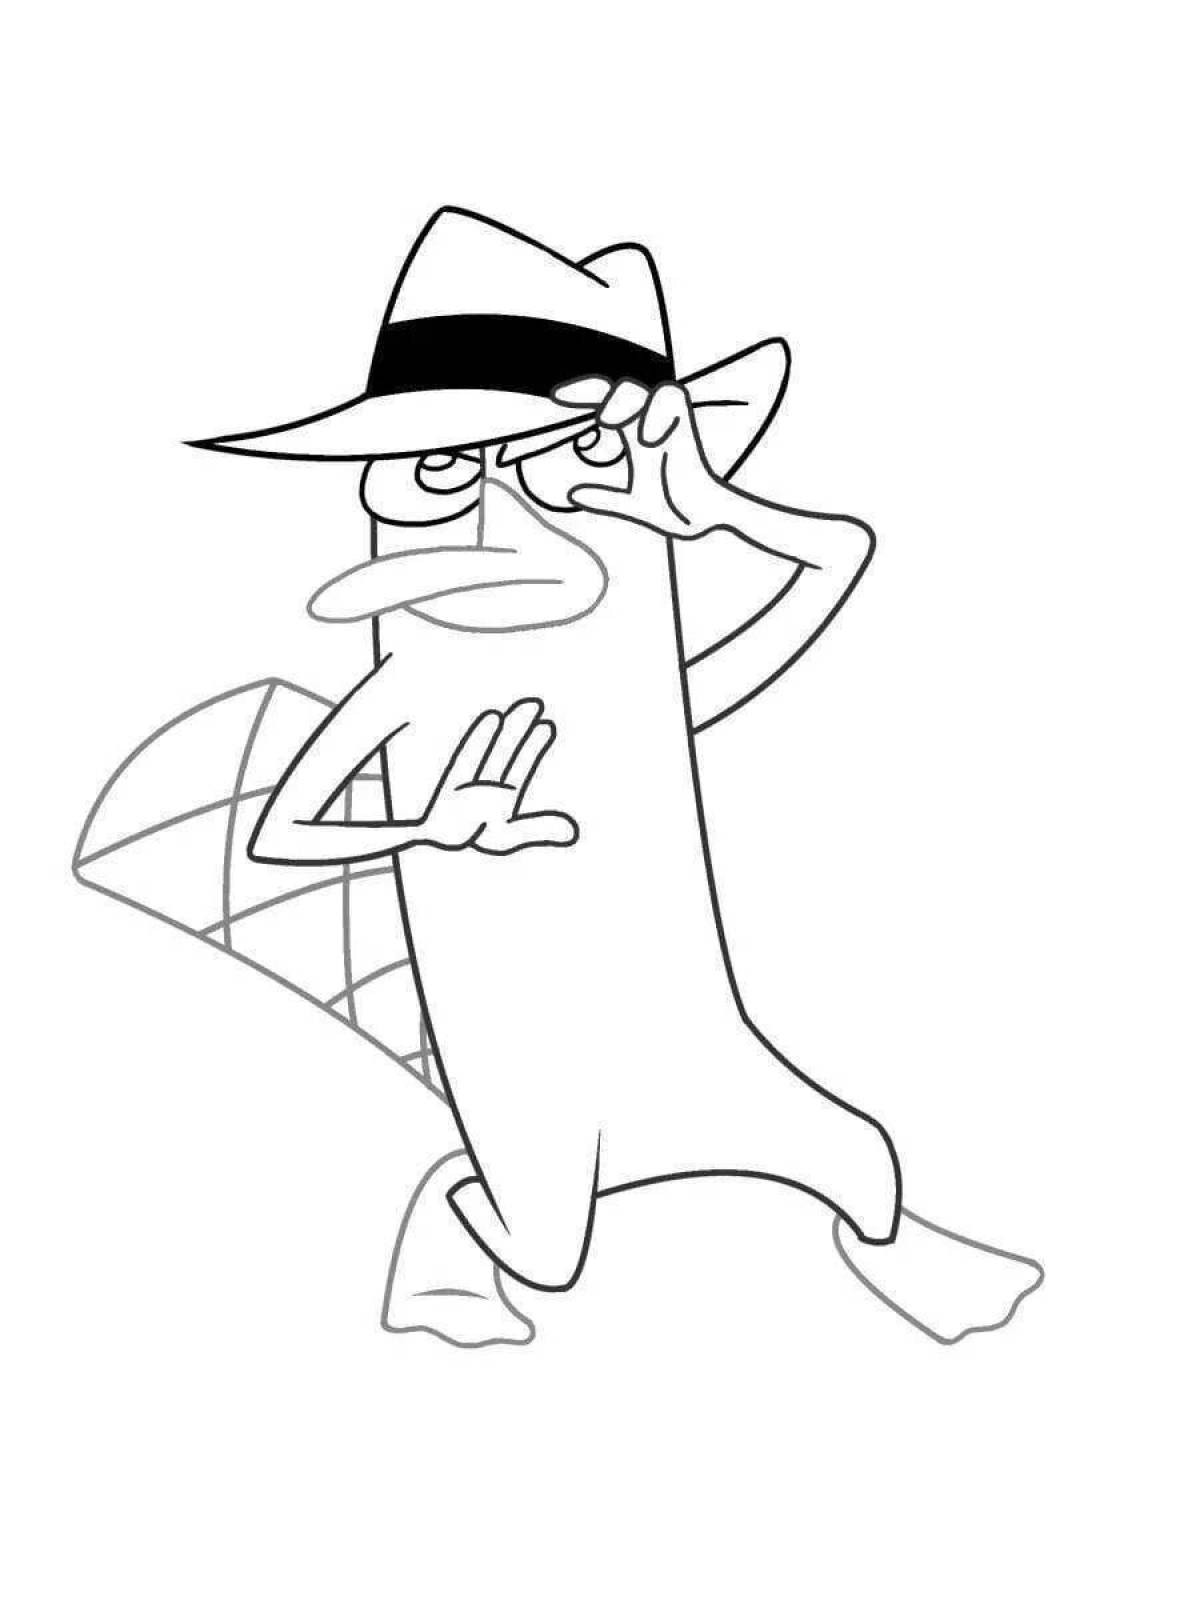 Perry the happy platypus coloring page